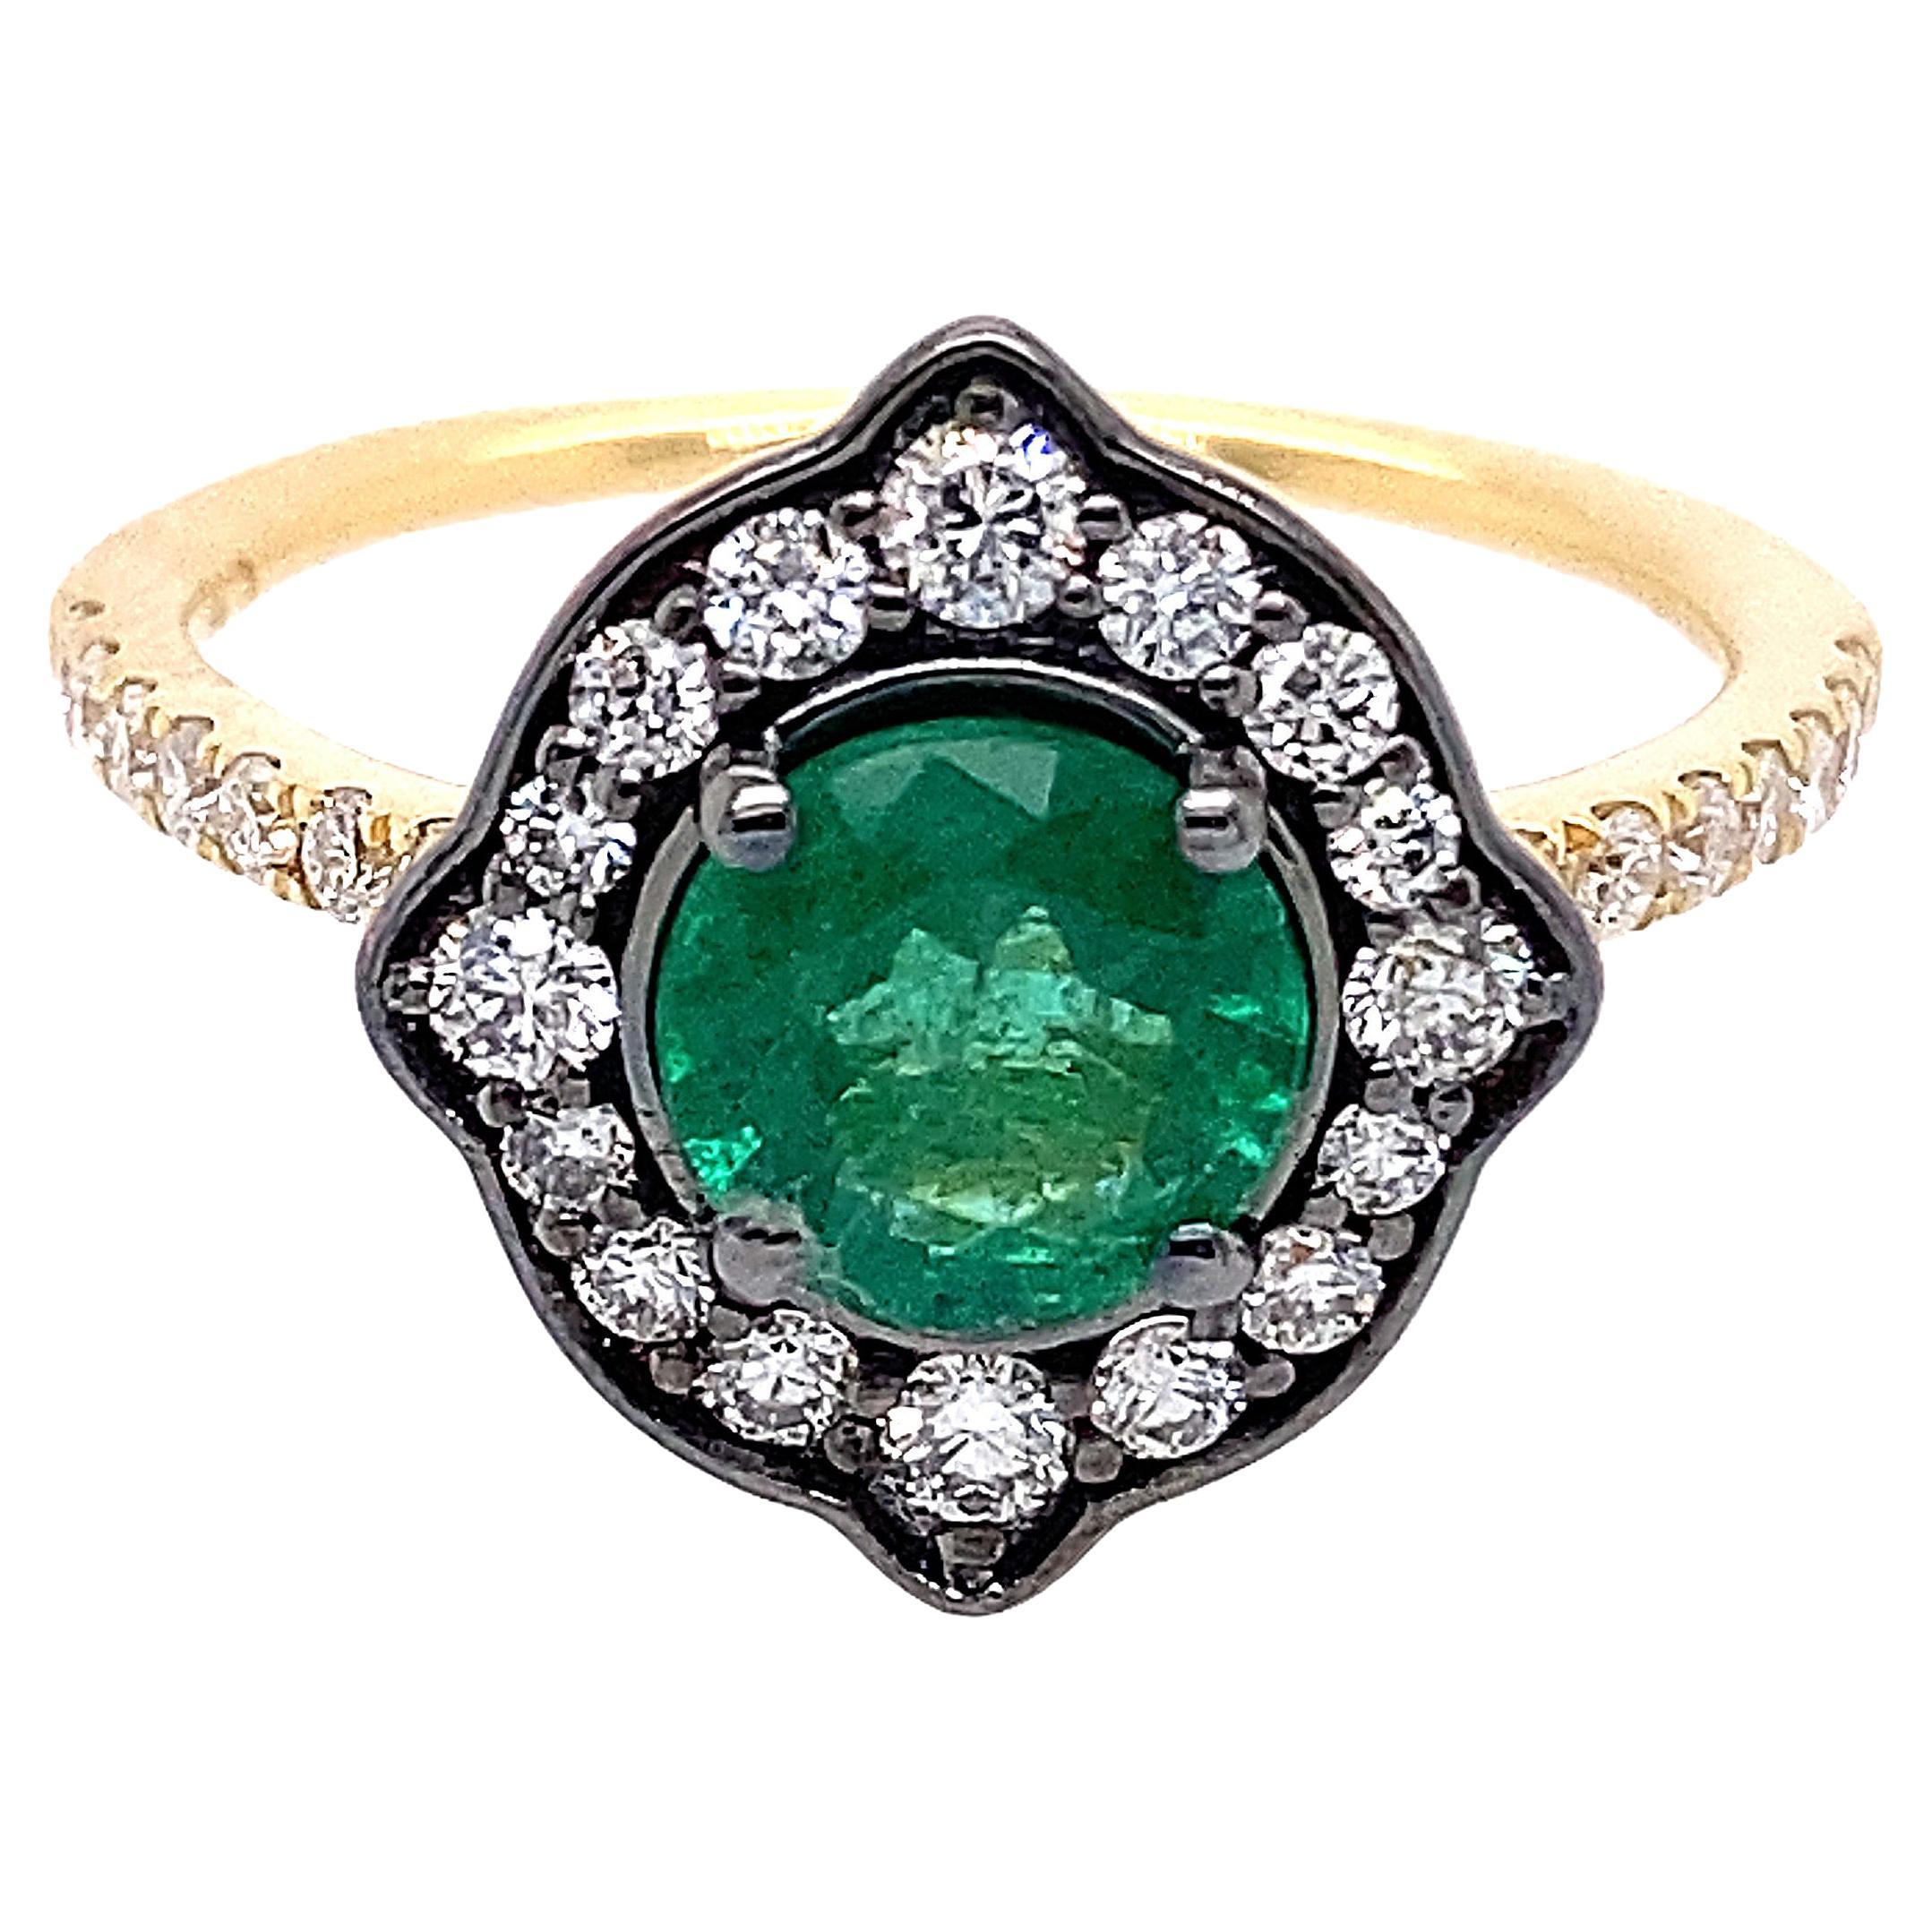 0.95 Carat Round Emerald and Diamond Cocktail Ring